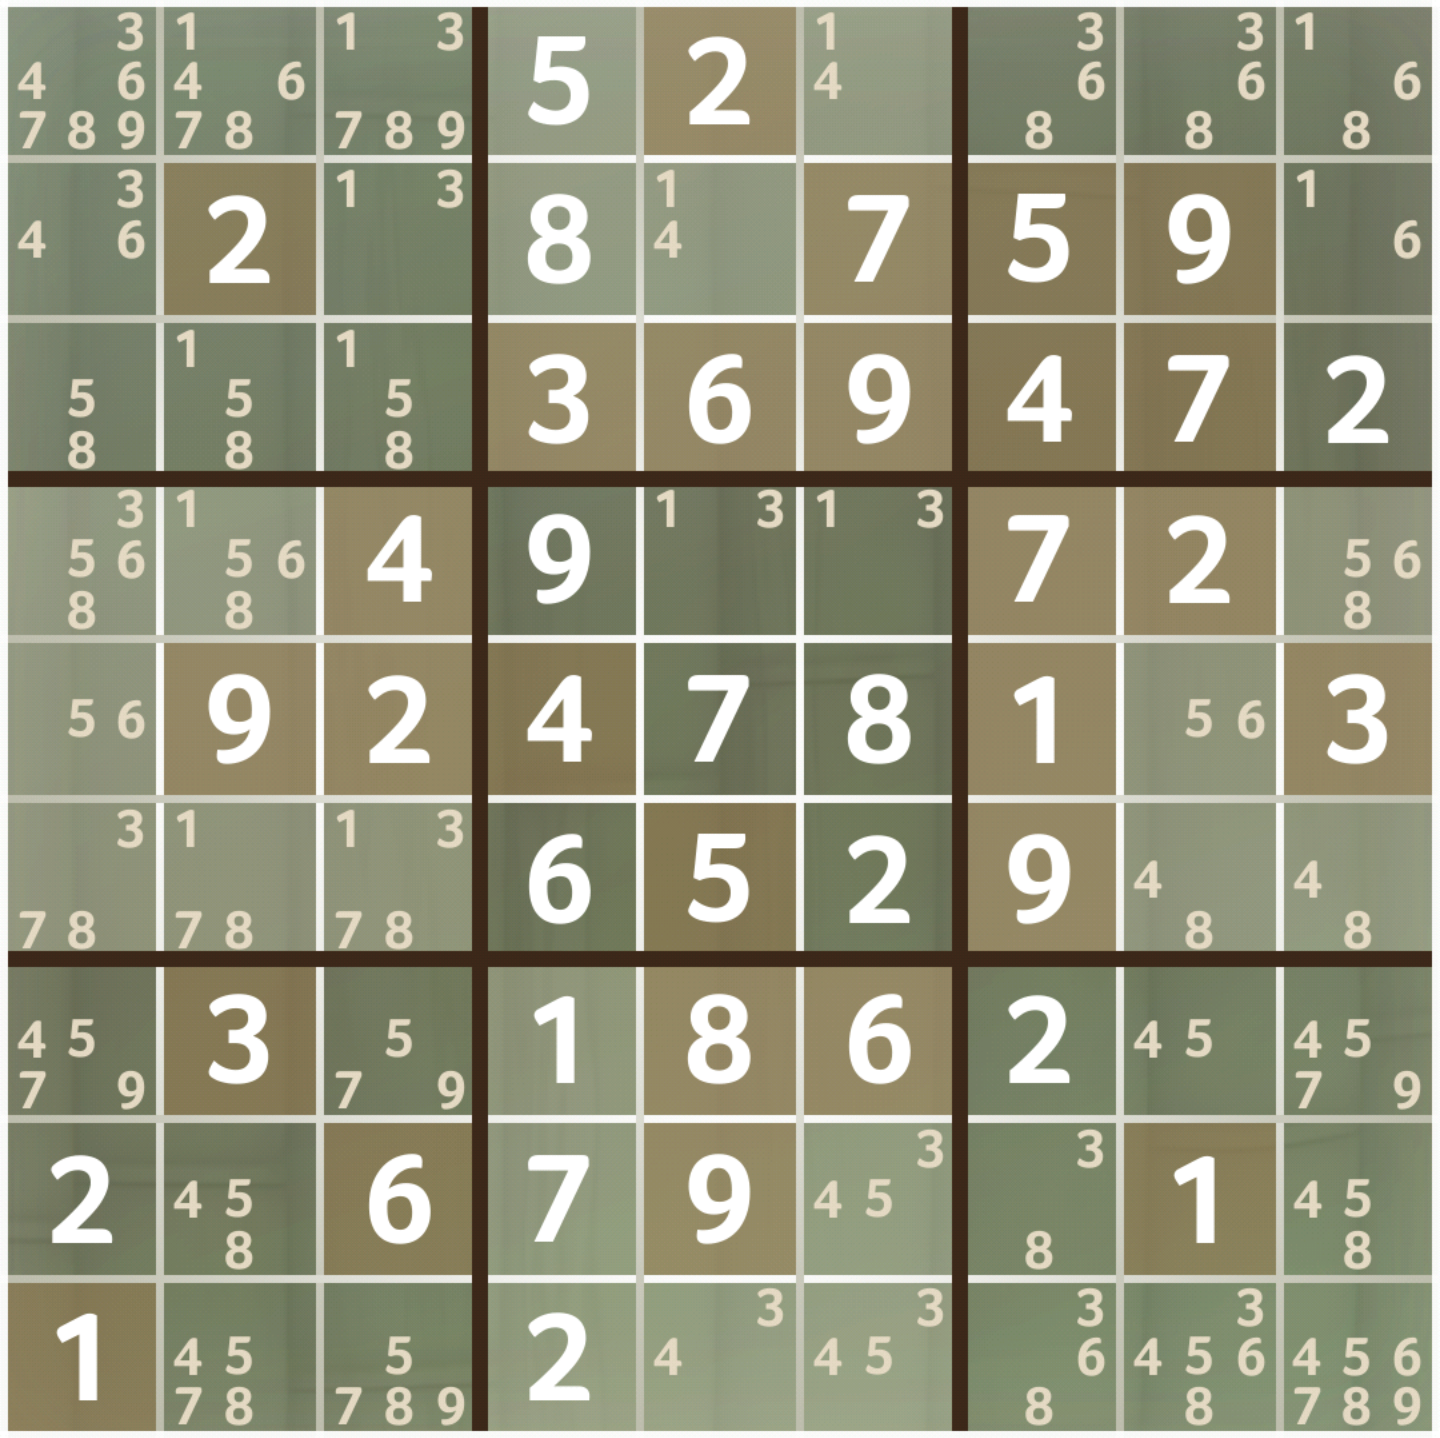 How to solve Sudoku - Games, Sudoku, Solution, Search, clue, Help